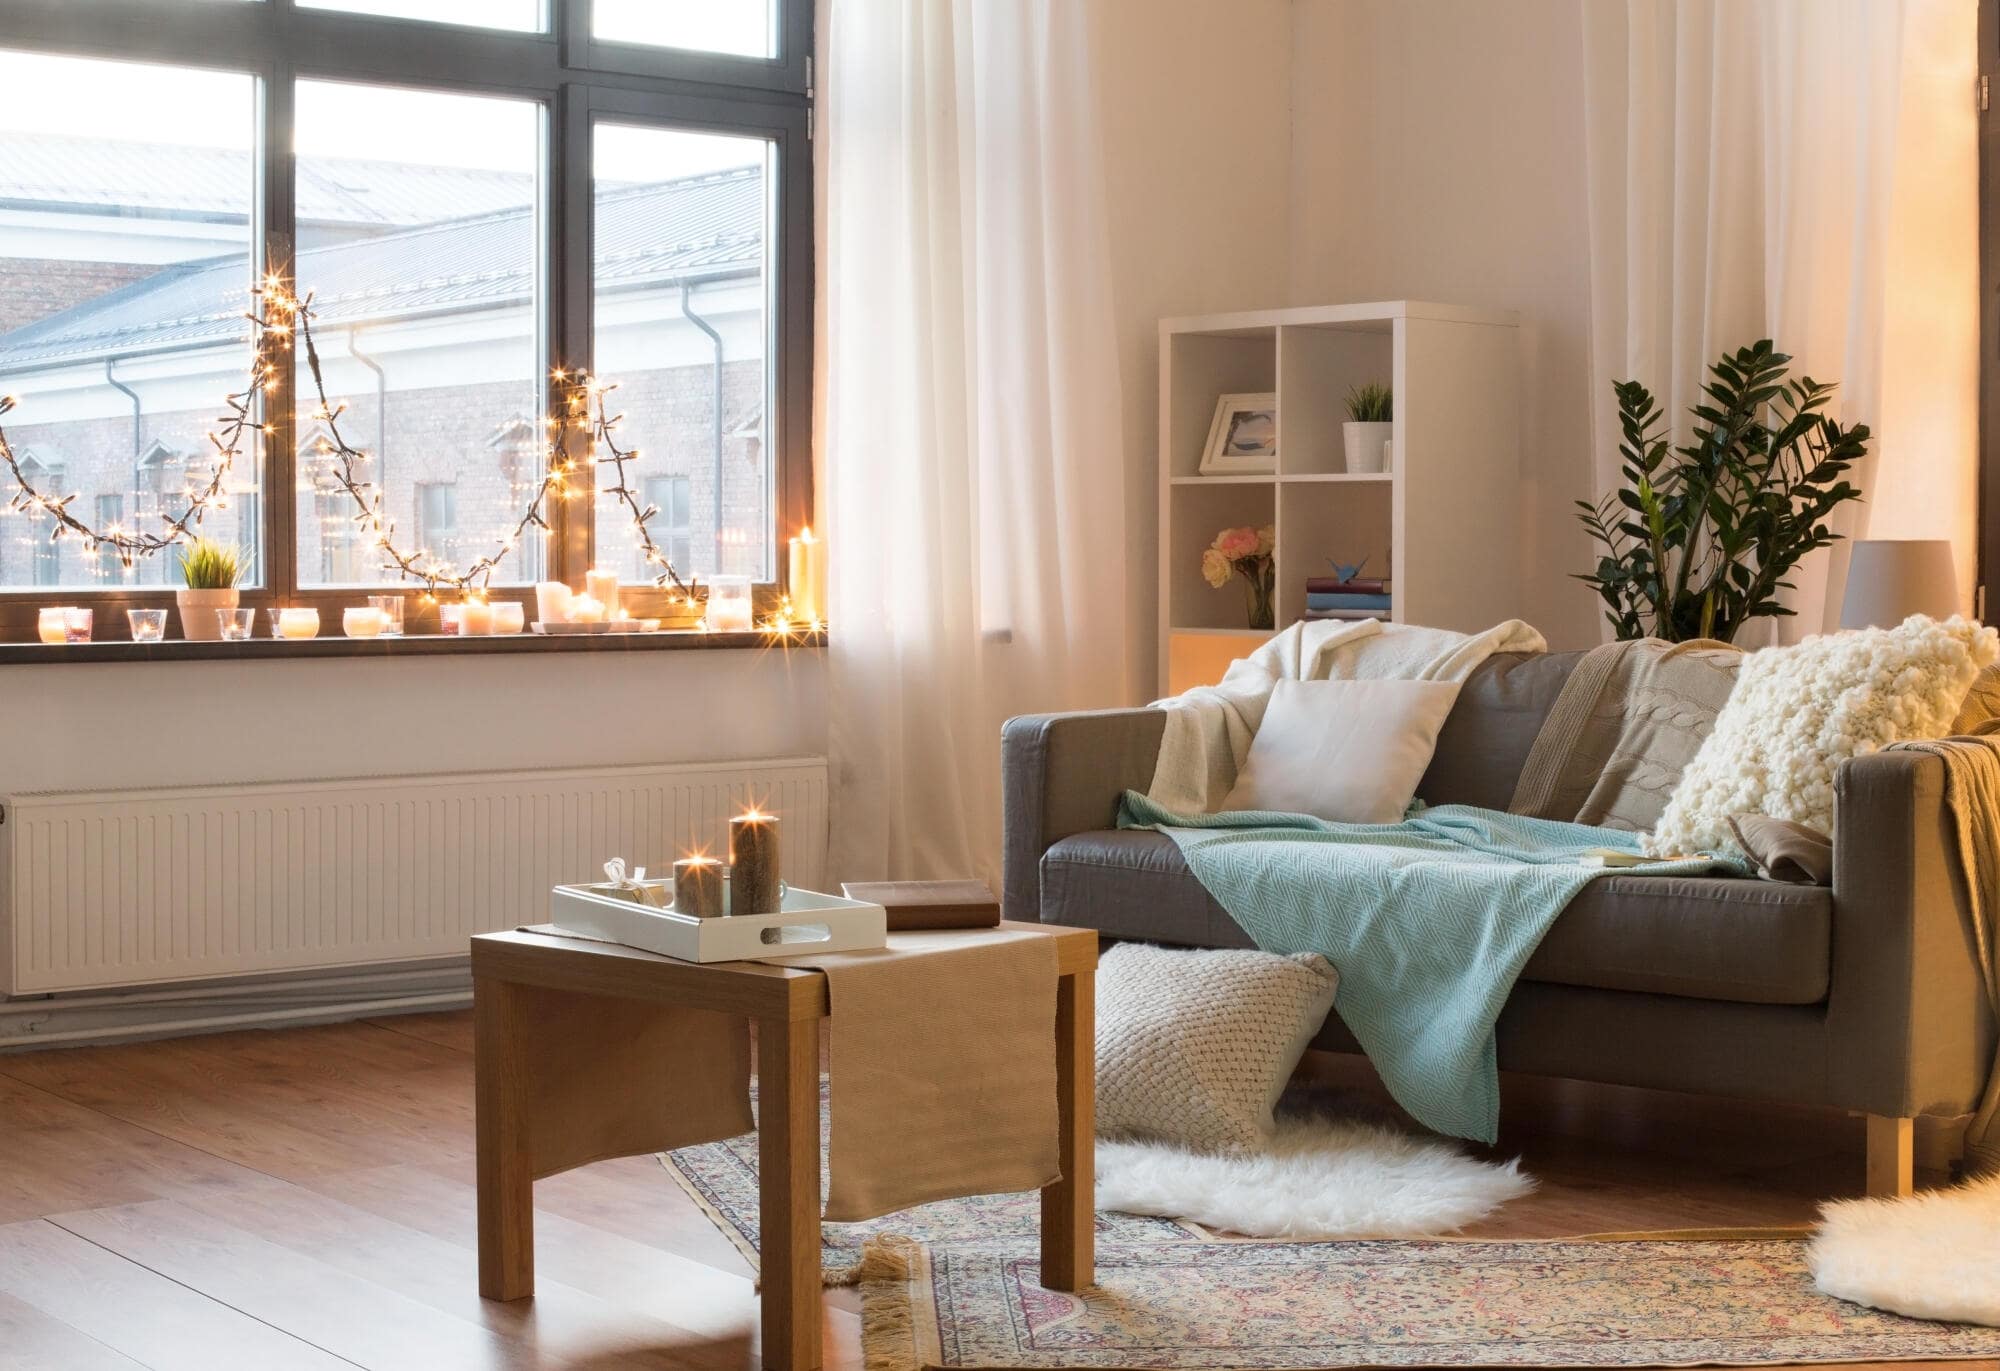 Holiday Vacation Rental Ideas: Creating a Festive Home Away (in Hooper, UT) from Home